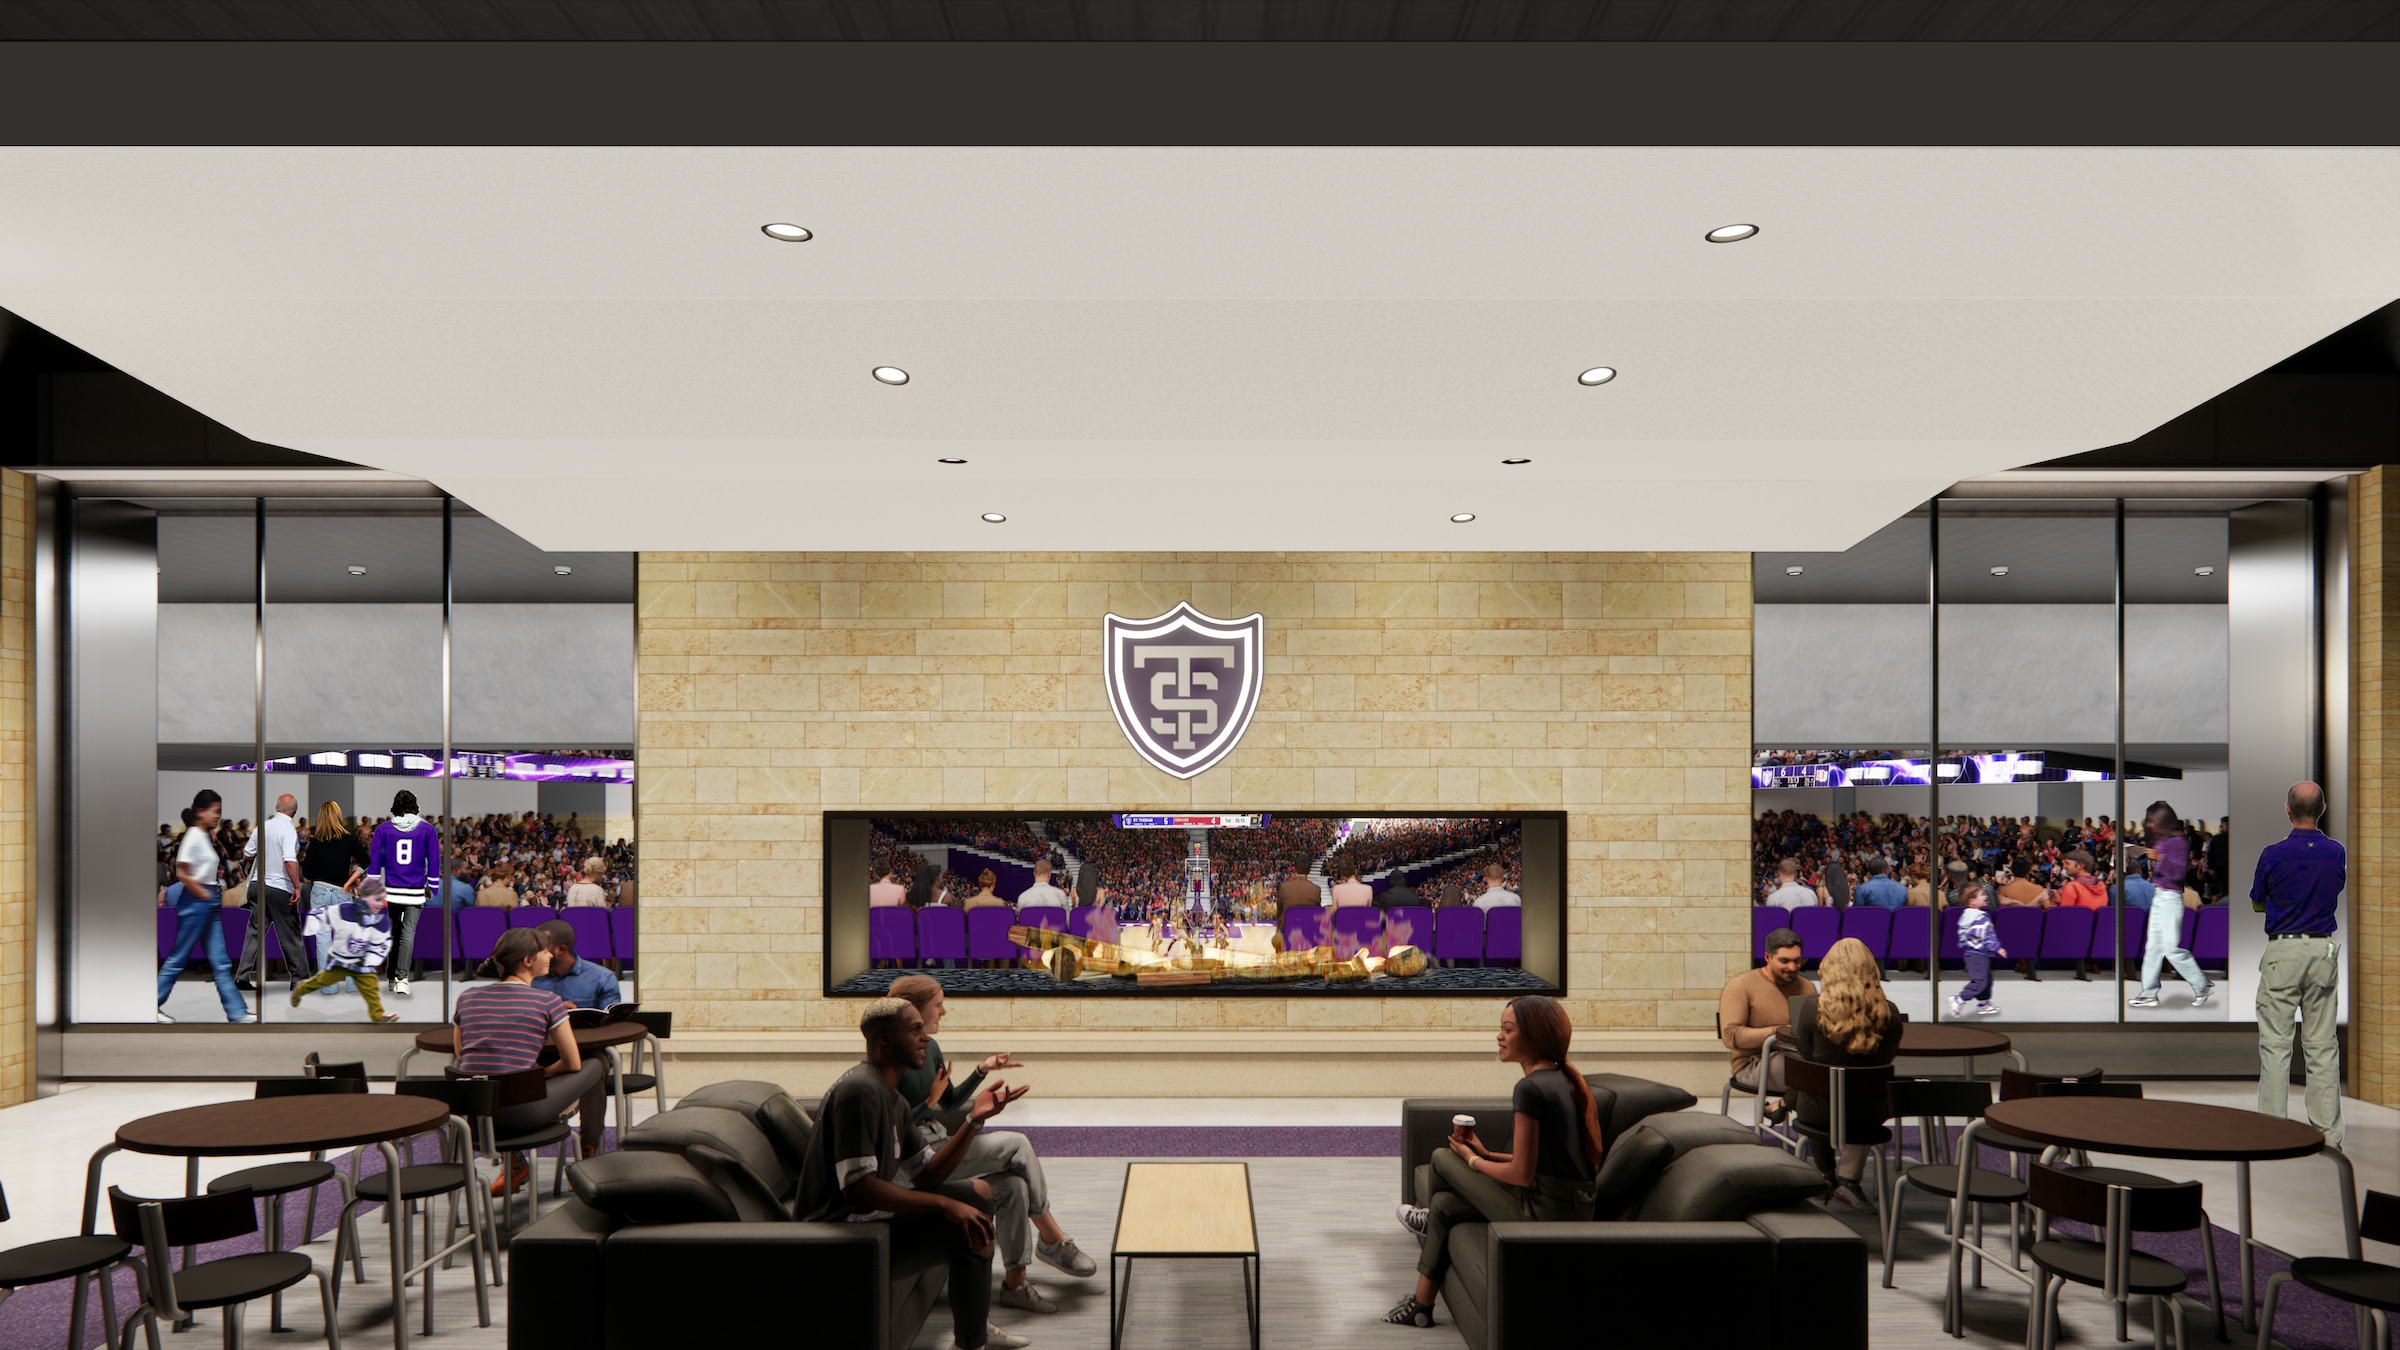 University of St. Thomas Lee and Penny Anderson Arena Renderings courtesy Ryan Companies, Crawford Architects Fireplace Gameday View